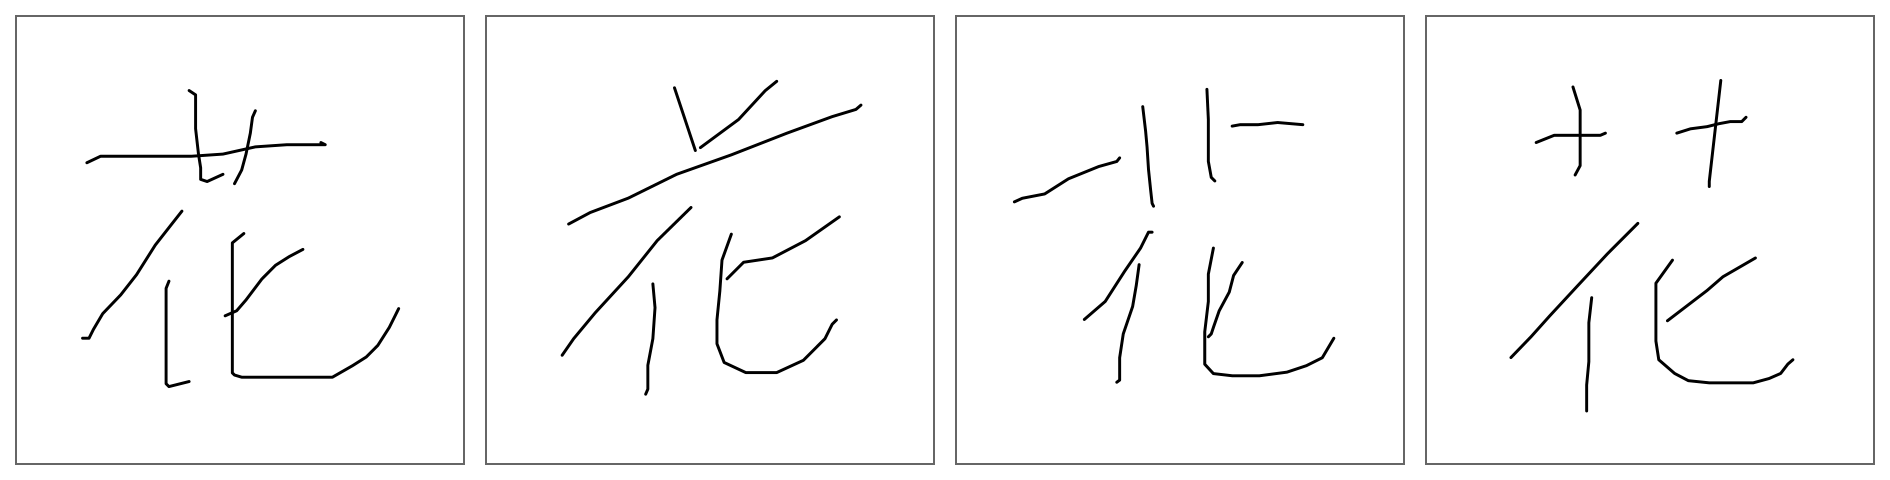 This figure shows four variations of the flower character in a printed style.